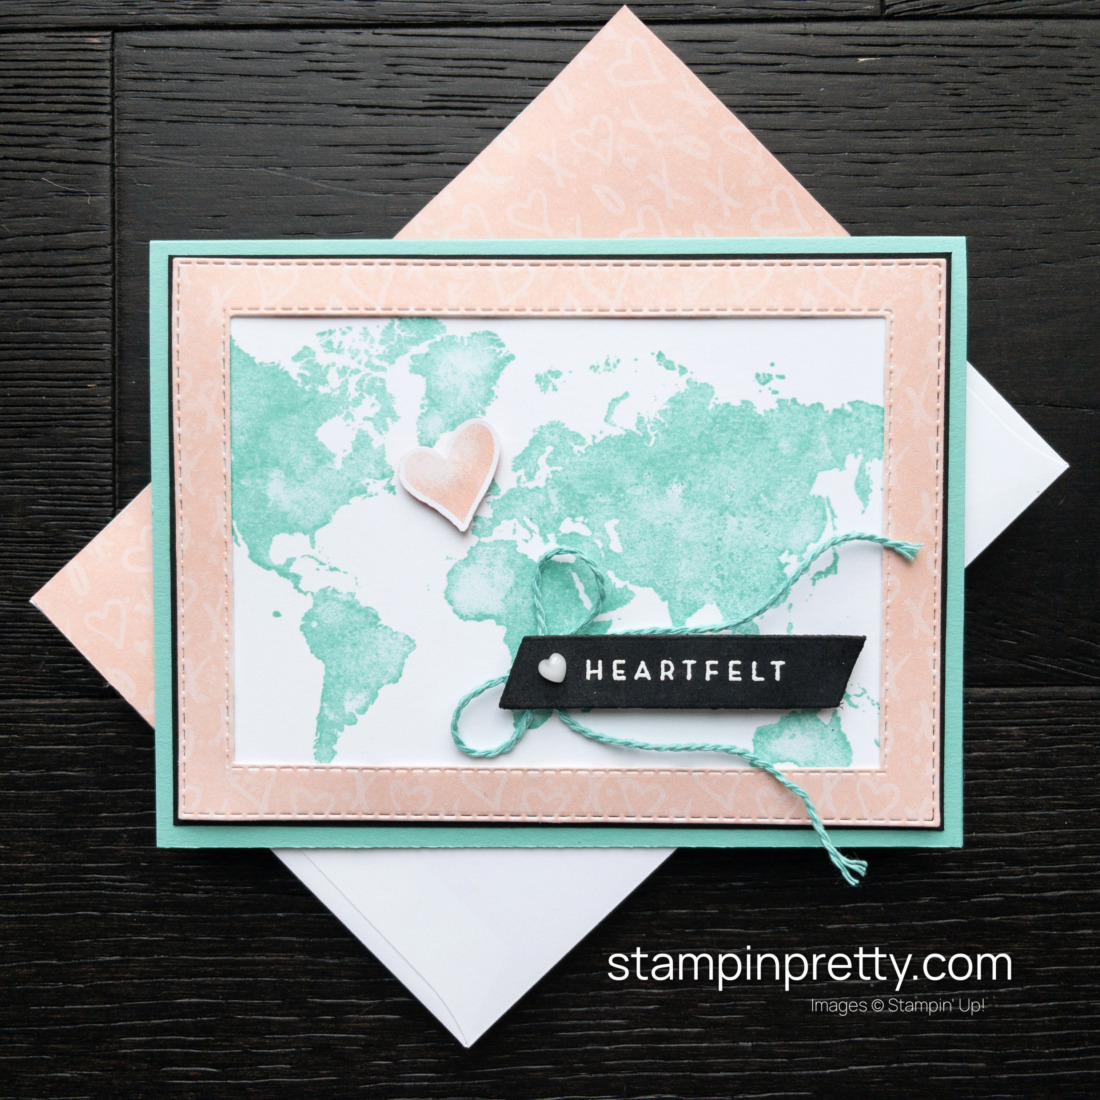 Create this Heartfelt card for a Long Distance Loved One using the Watercolor World Stamp Set by Stampin' Up! Mary Fish, Stampin' Pretty